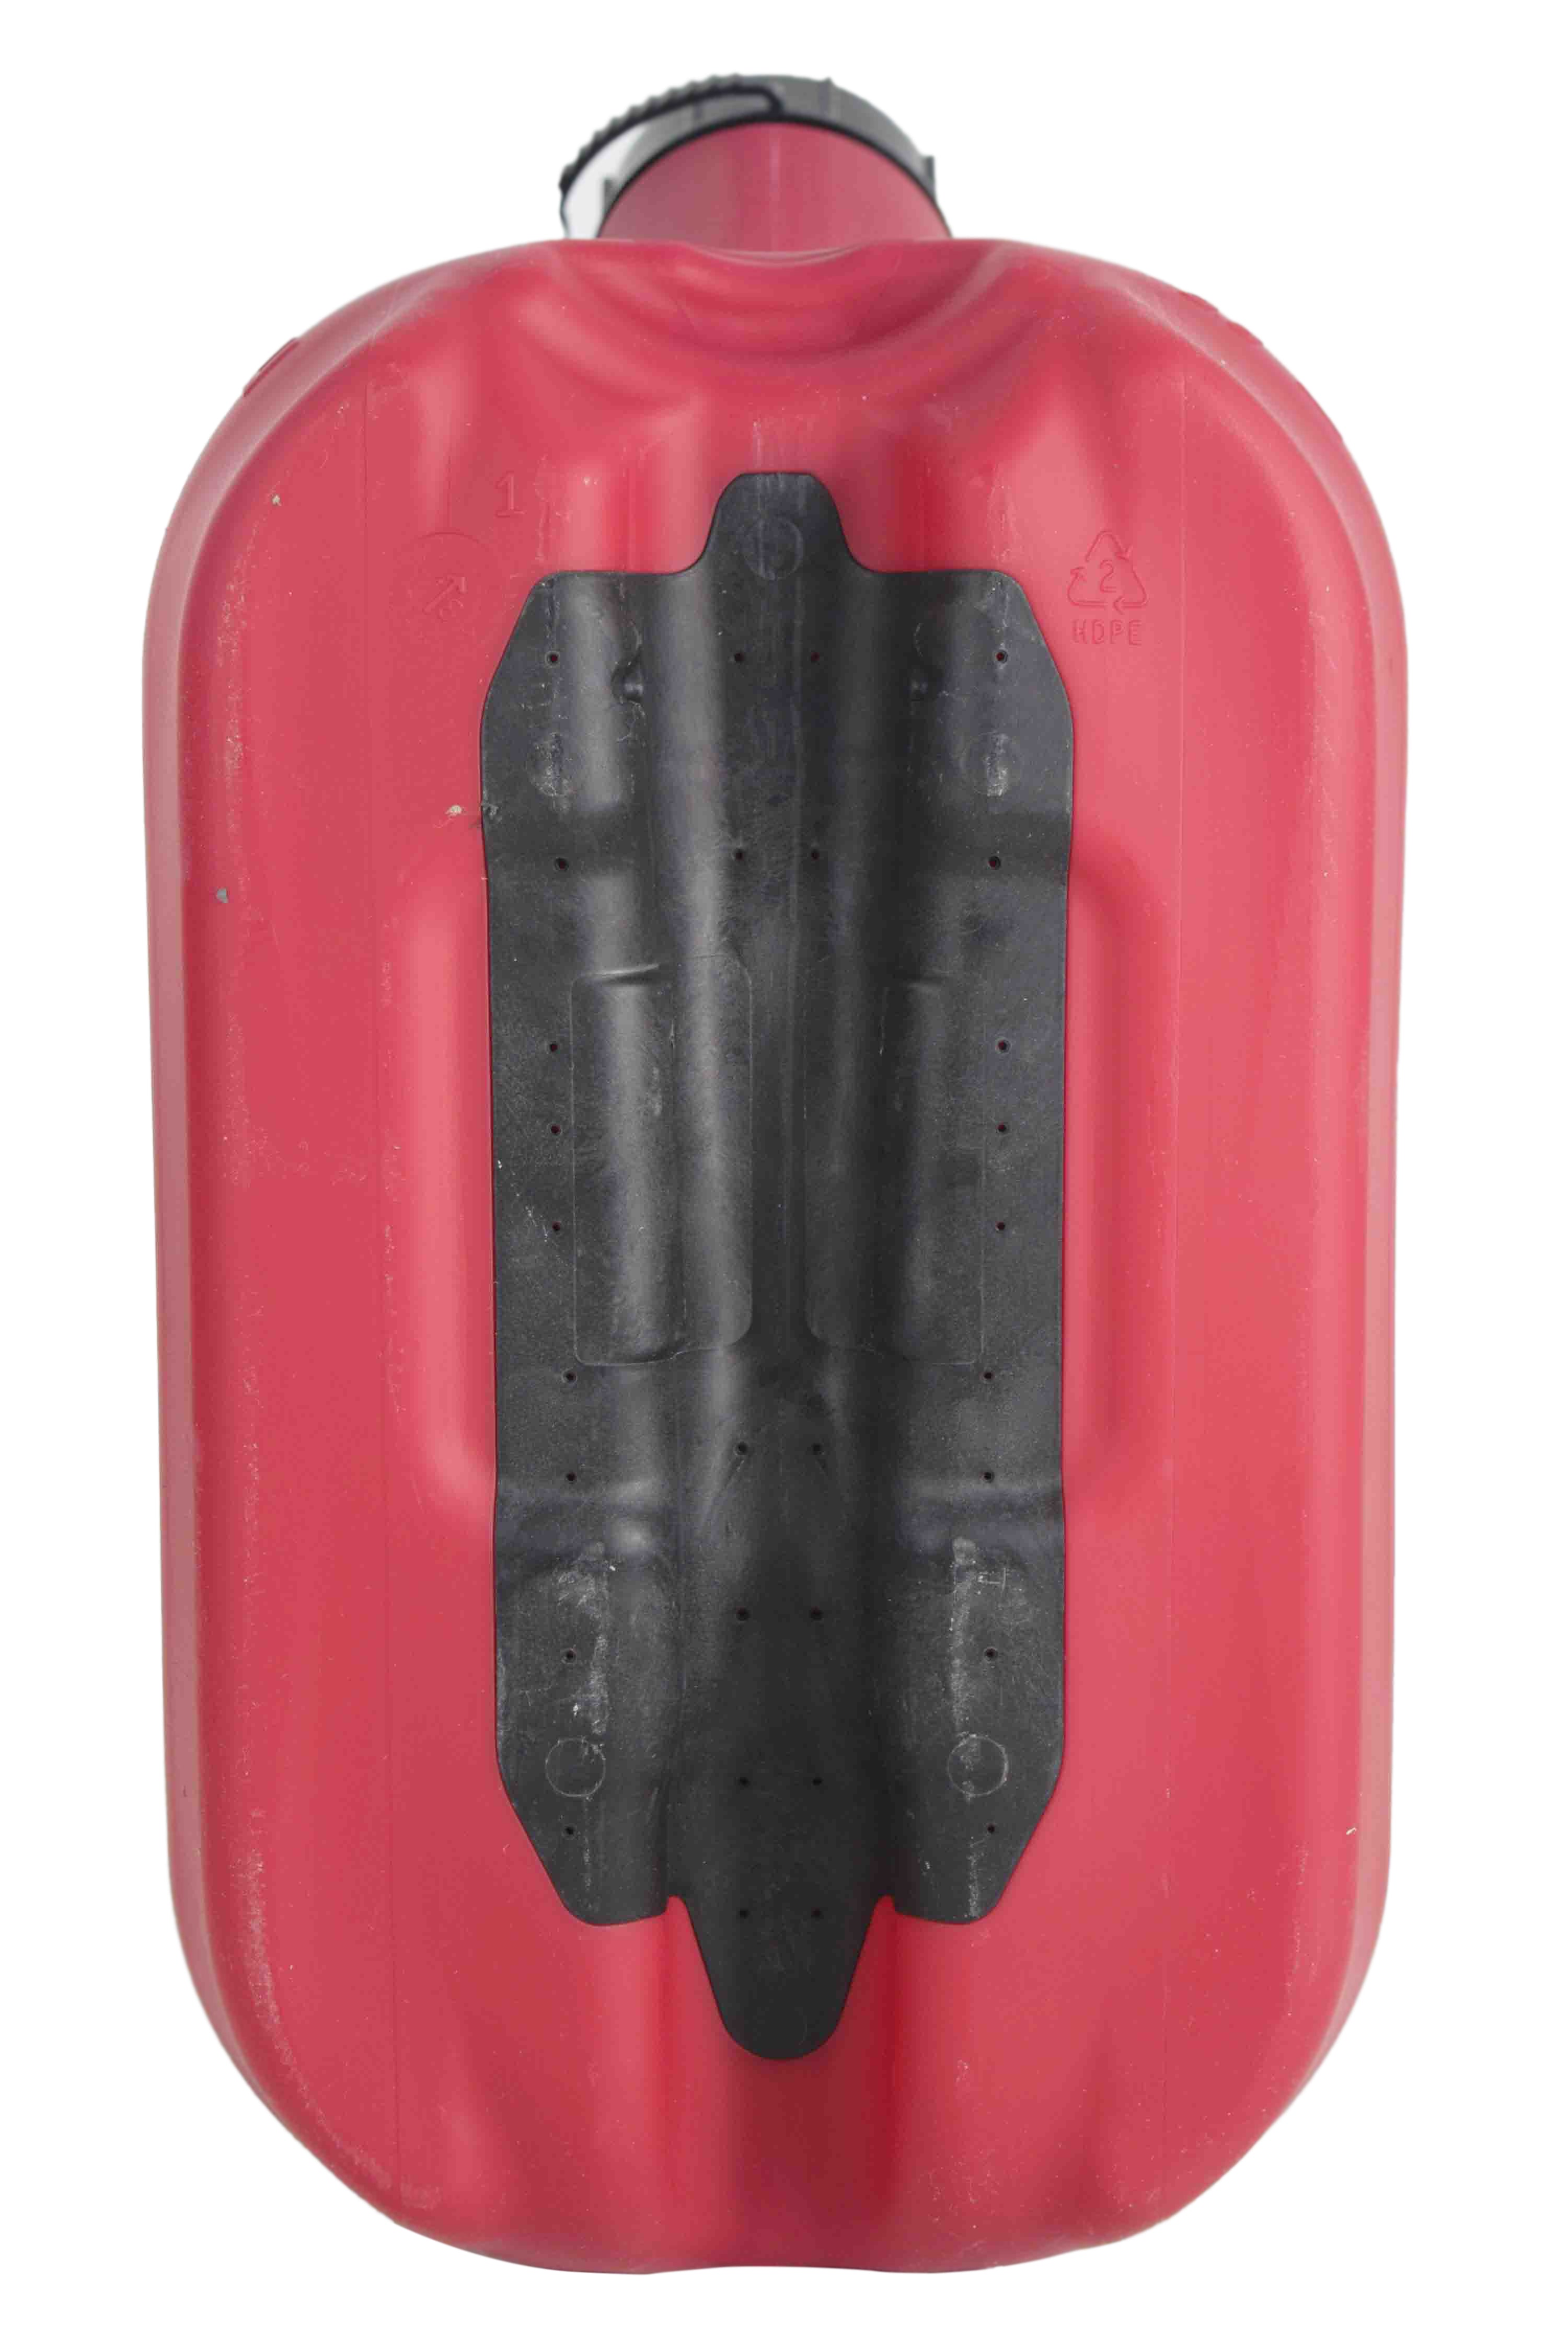 Fuelworx Red 2.5 Gallon Stackable Fast Pour Gas Fuel Cans CARB Compliant Made in The USA (2.5 Gallon Gas Single Can)